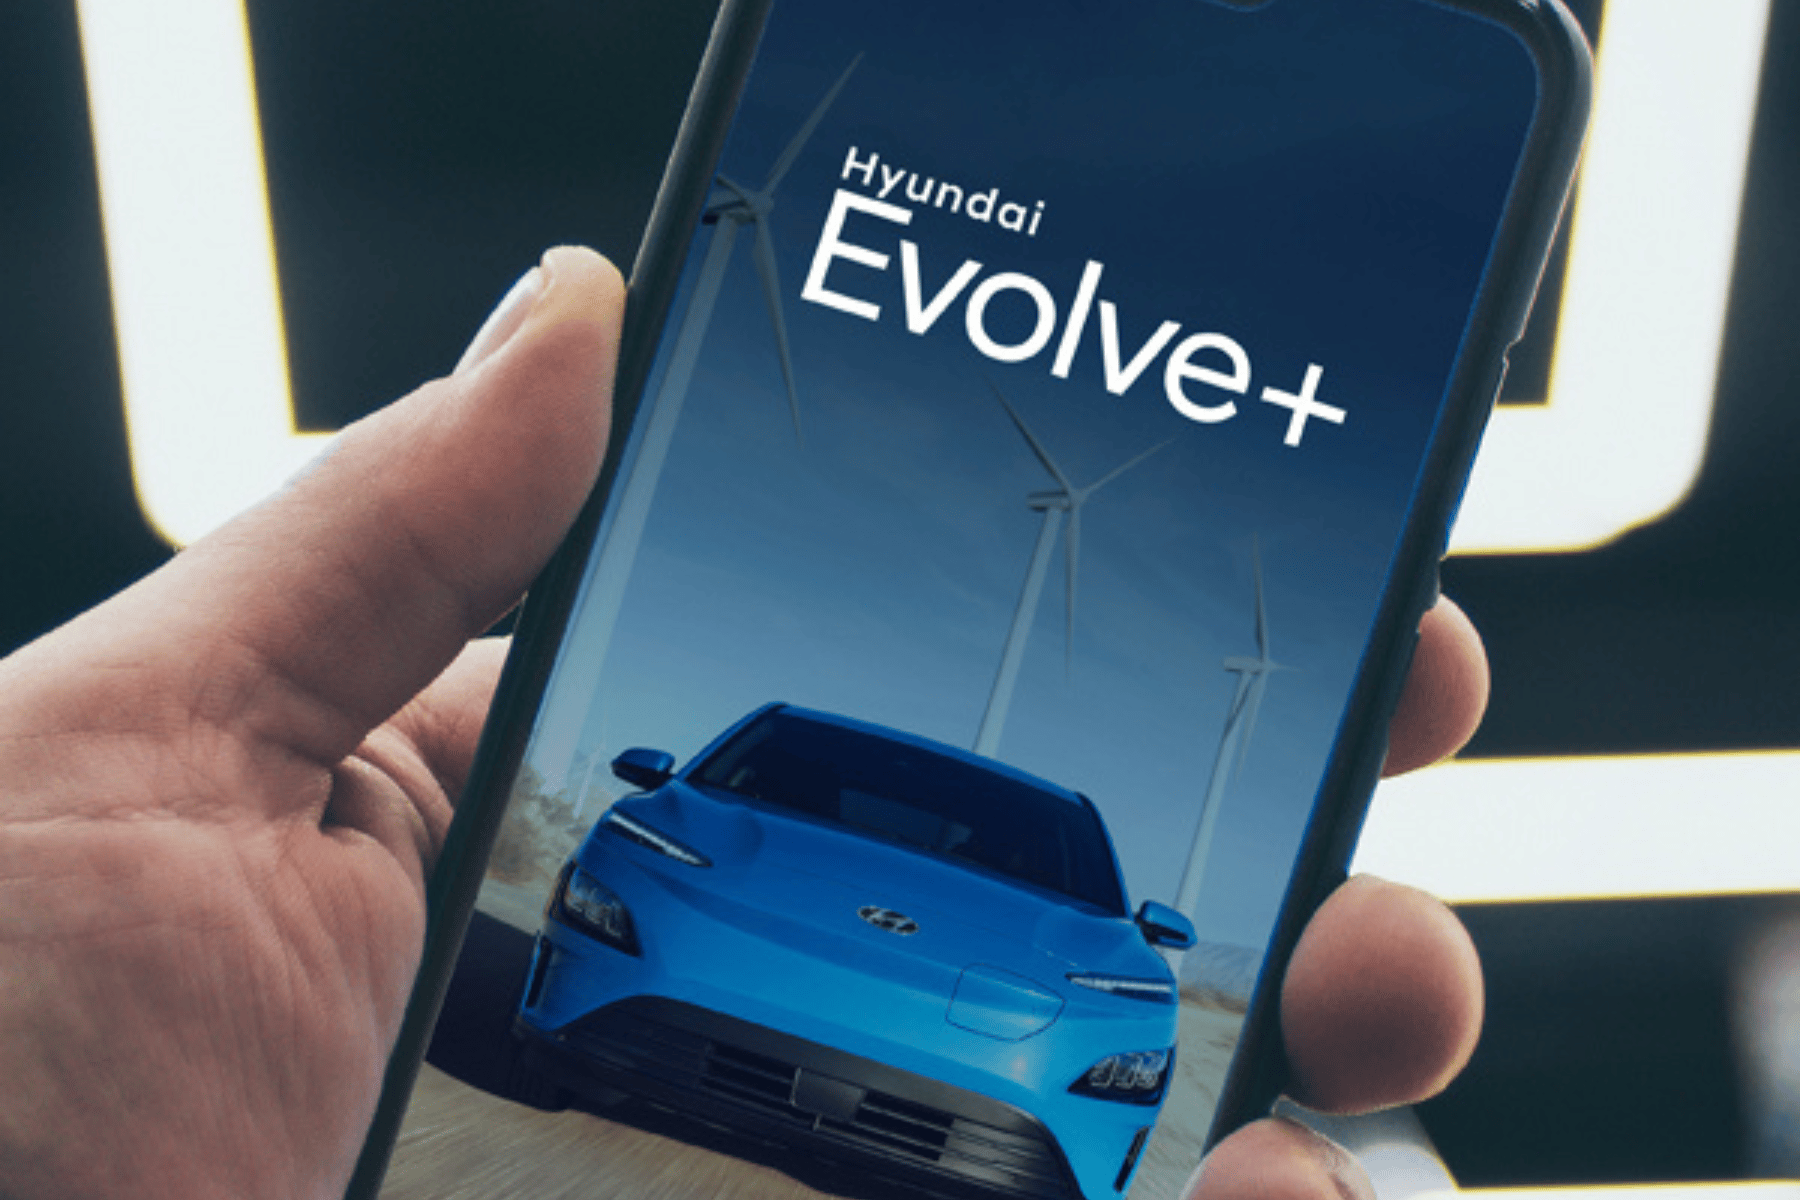 Hyundai Launches Evolve+: A New Electric Vehicle Subscription Service for the Modern Driver